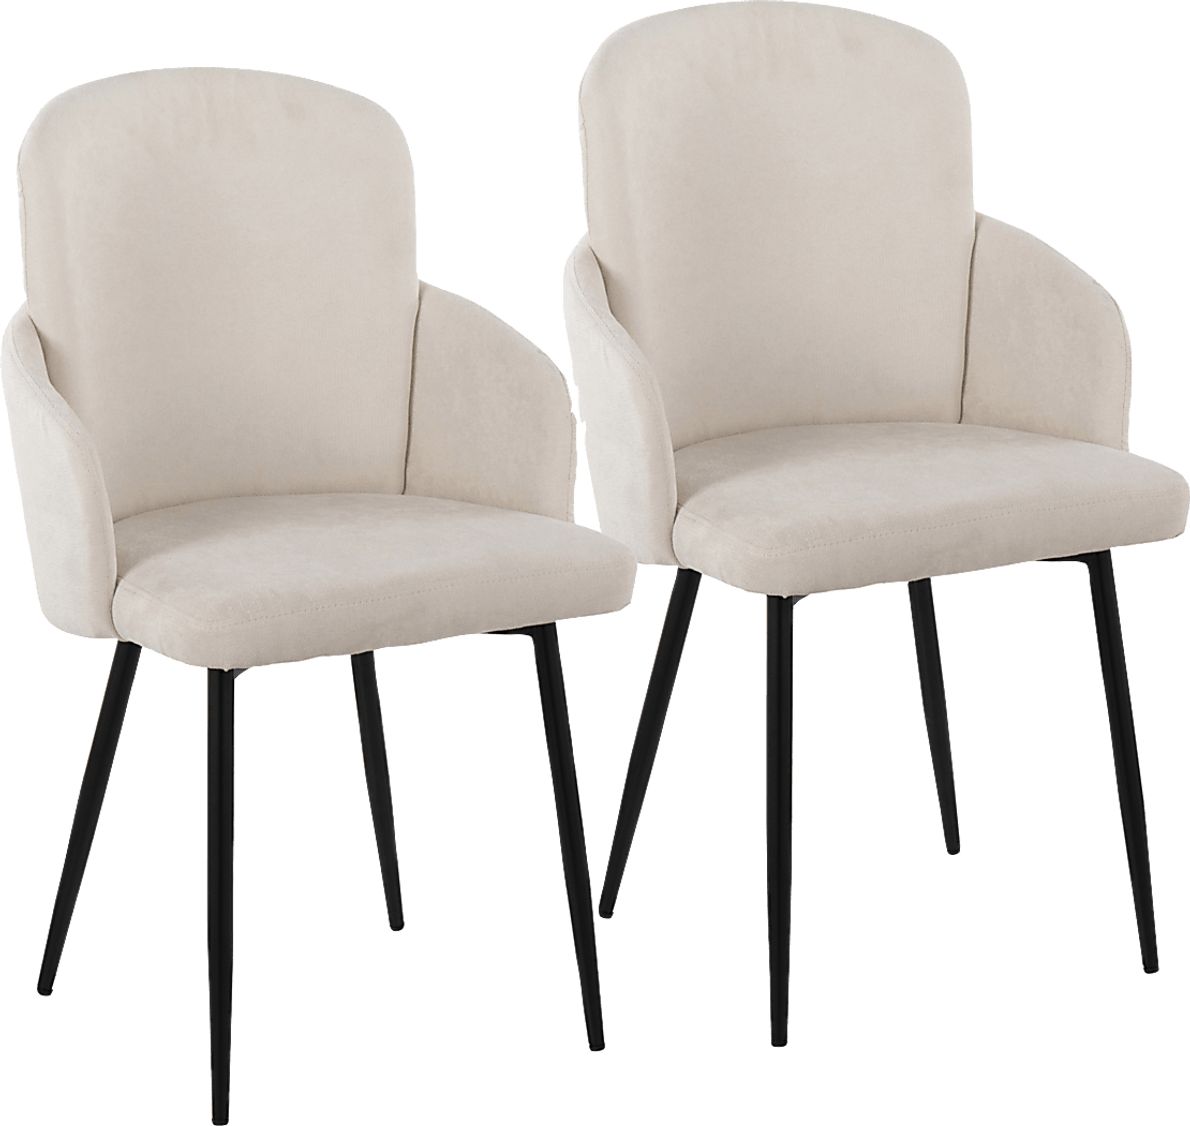 Maglista II Cream Dining Chair Set of 2